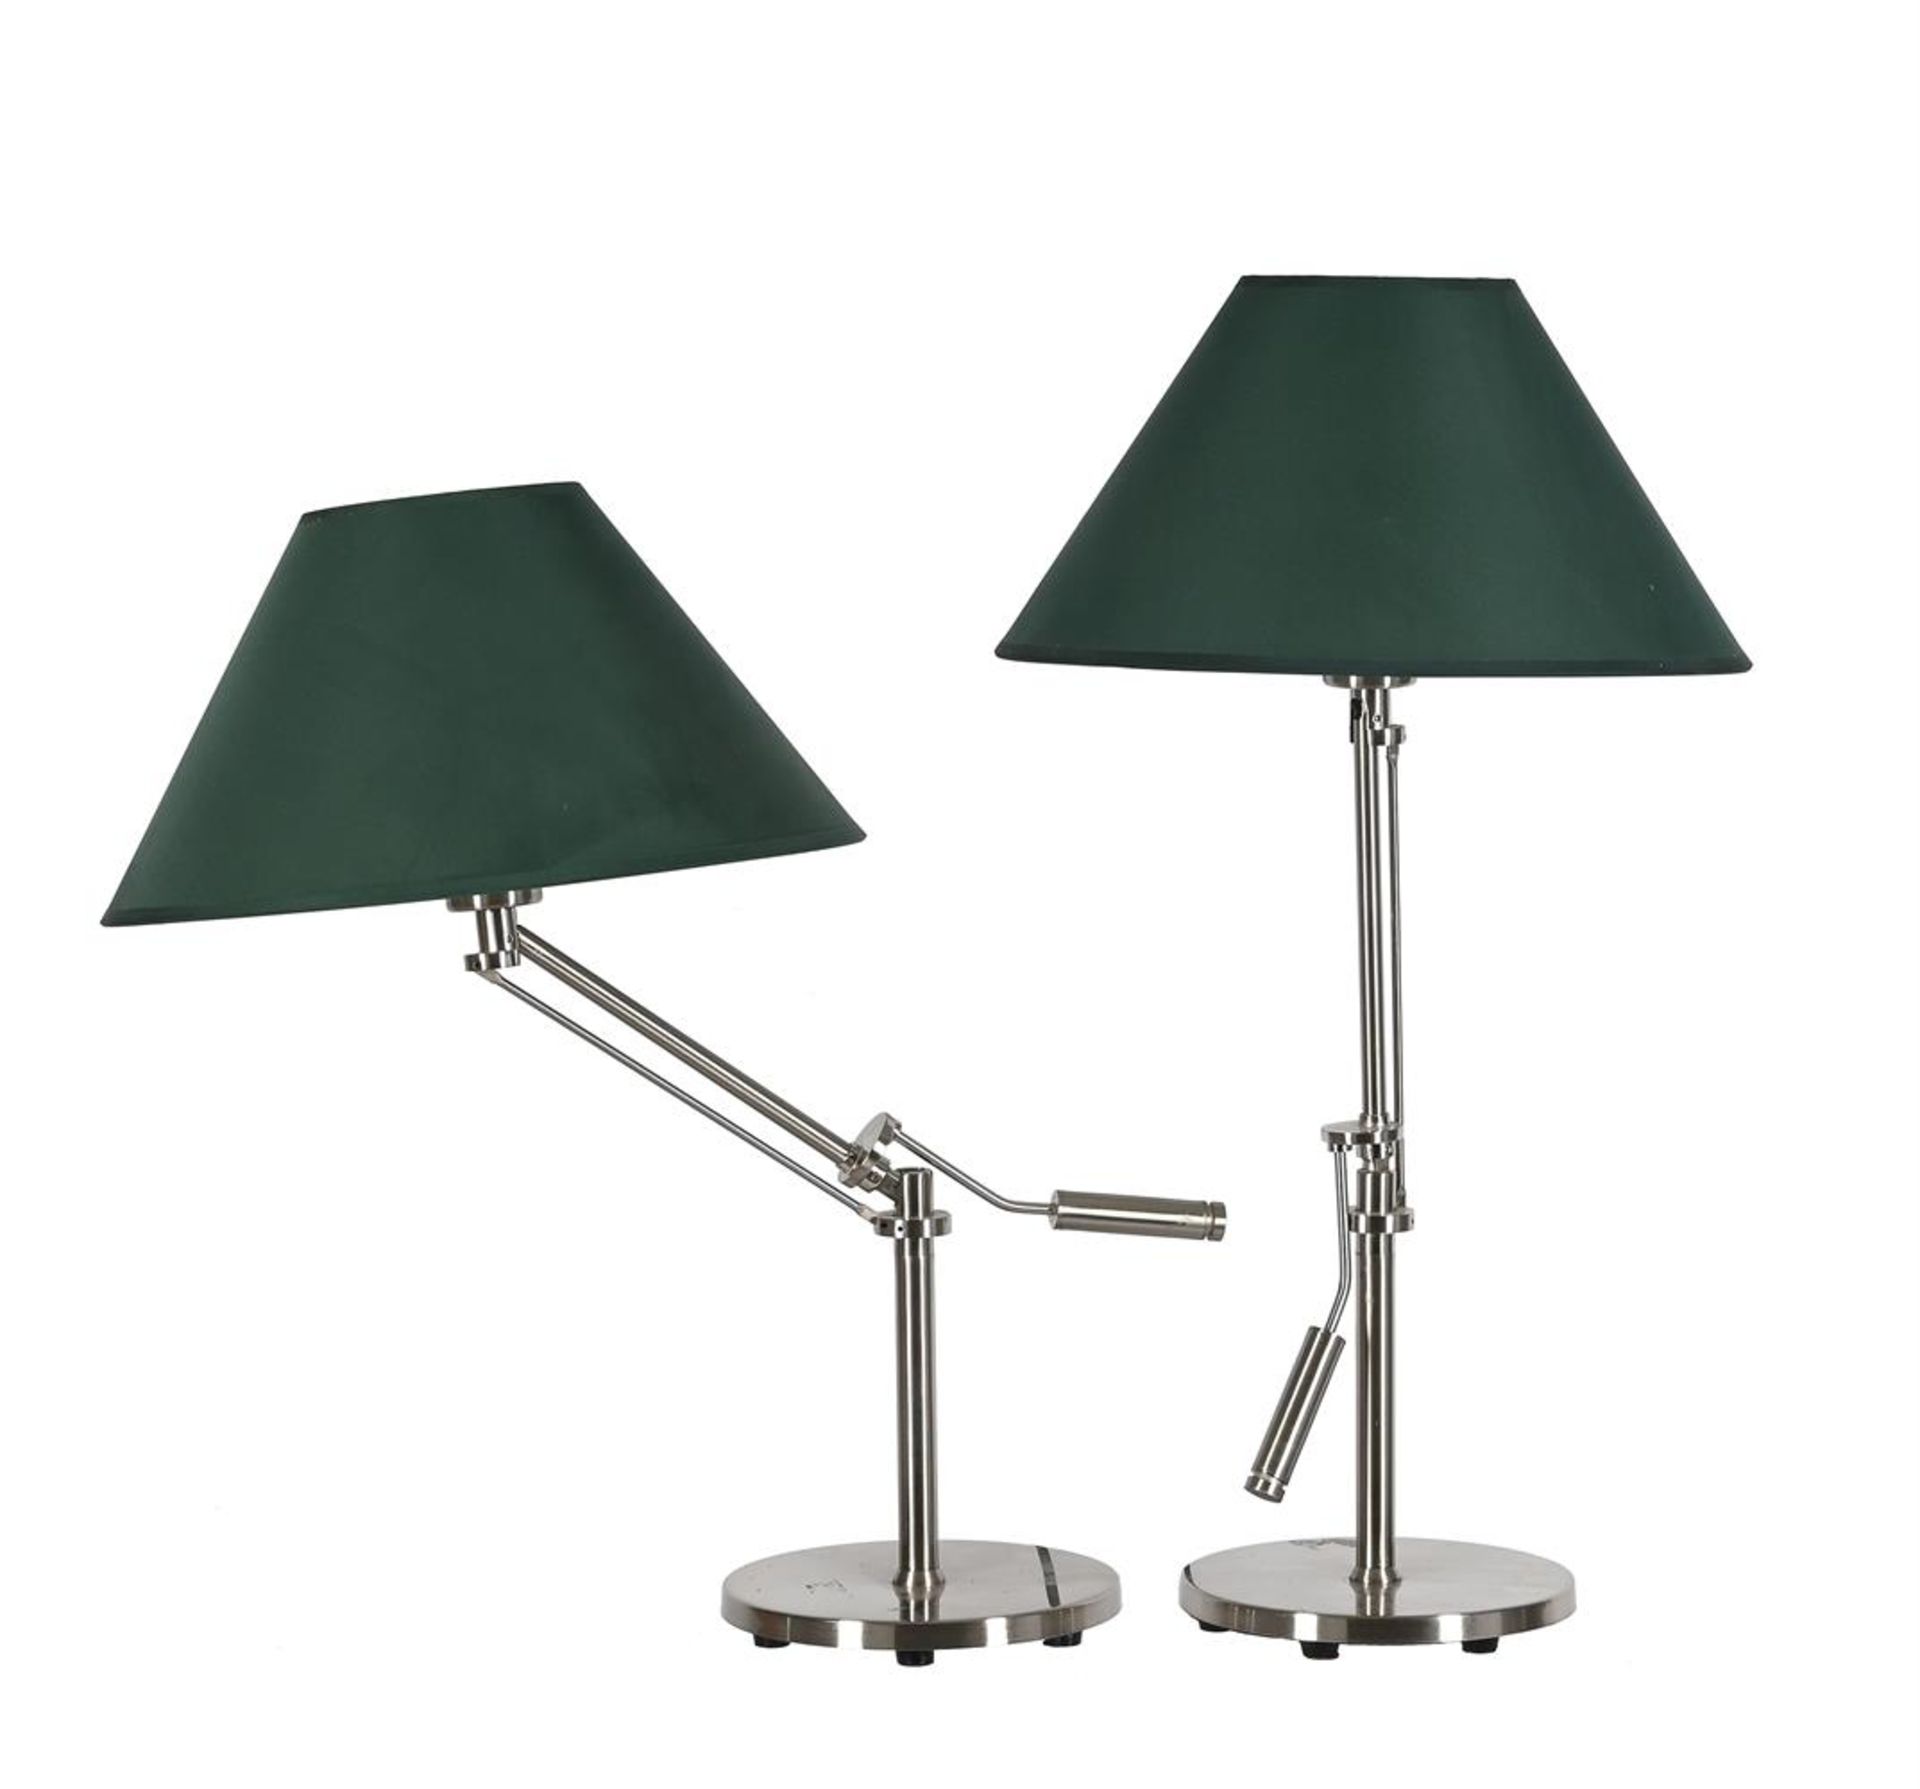 A PAIR OF WHITE COMPANY BRUSHED STEEL ADJUSTABLE TABLE LAMPS WITH GREEN SHADES - Image 2 of 2